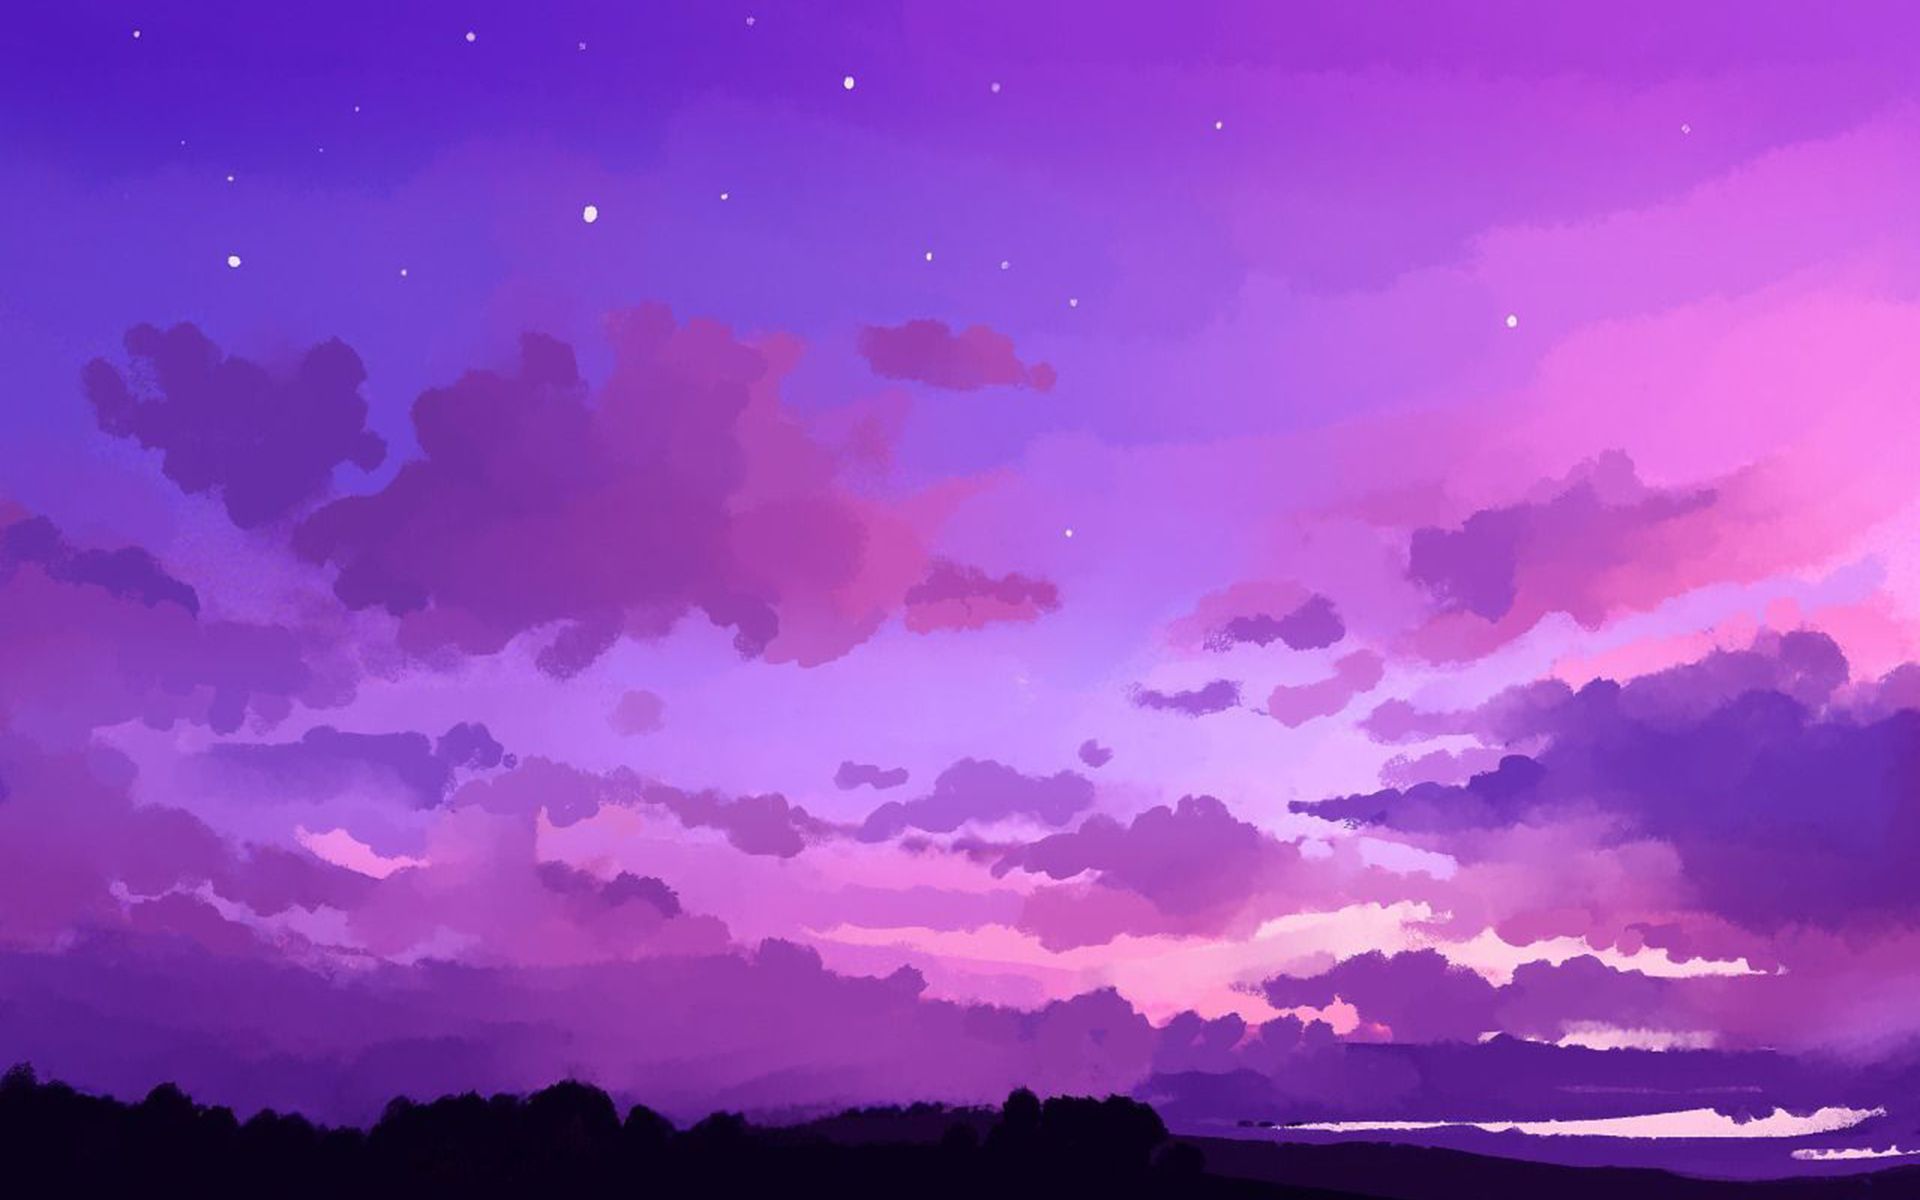 A painting of a purple and pink sunset sky with clouds and stars. - Computer, landscape, 1920x1200